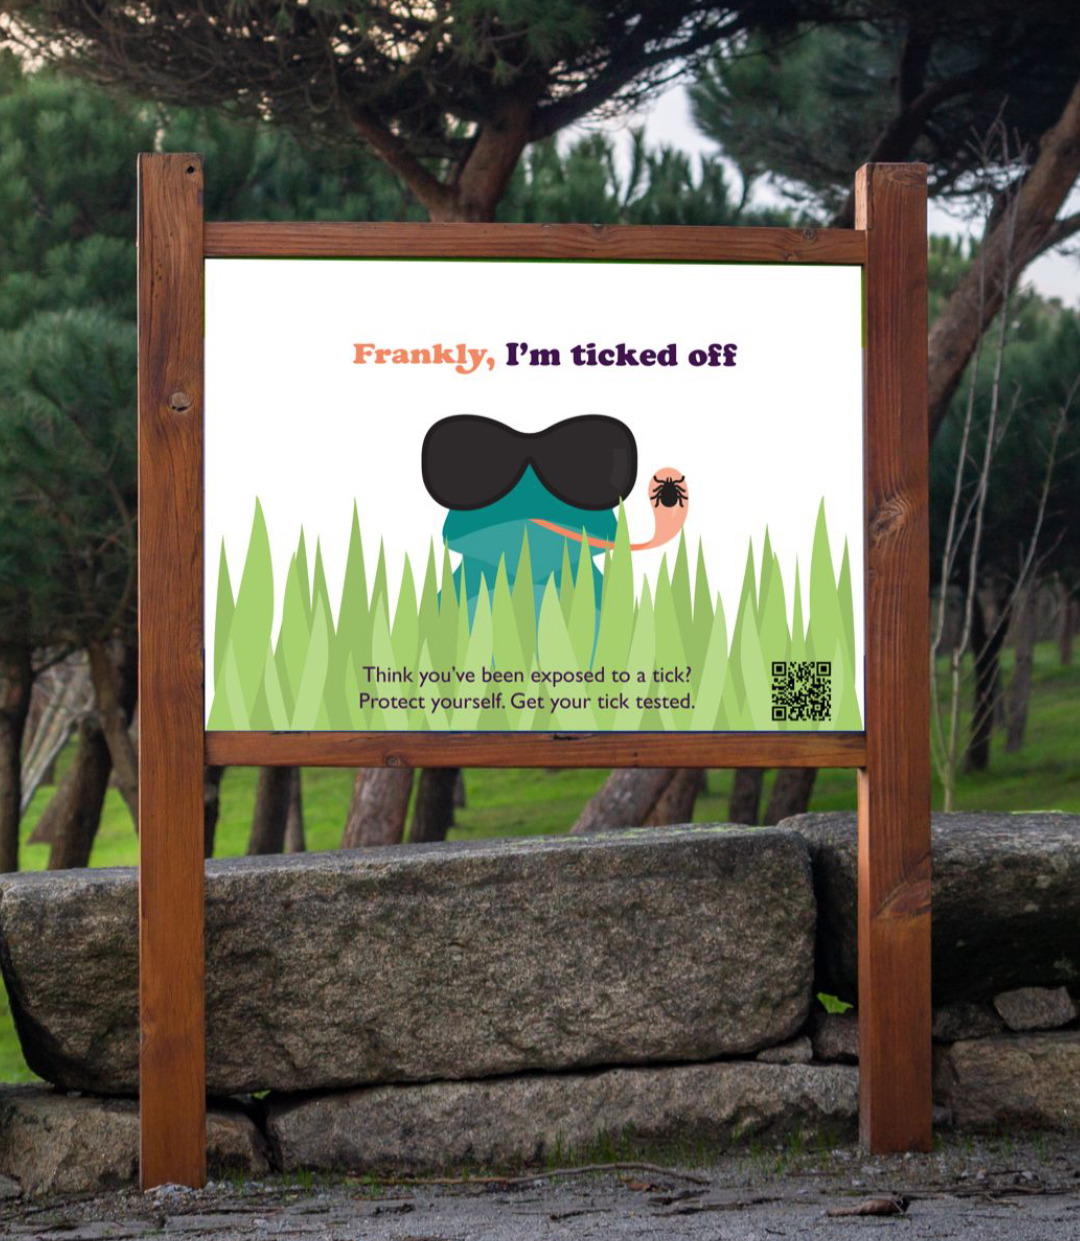 A photo of a sign that reads "Frankly, I'm ticked off. Think you've been exposed to a tick? Protect yourself. Get your tick tested." with an illustration of the Frankly frog mascot